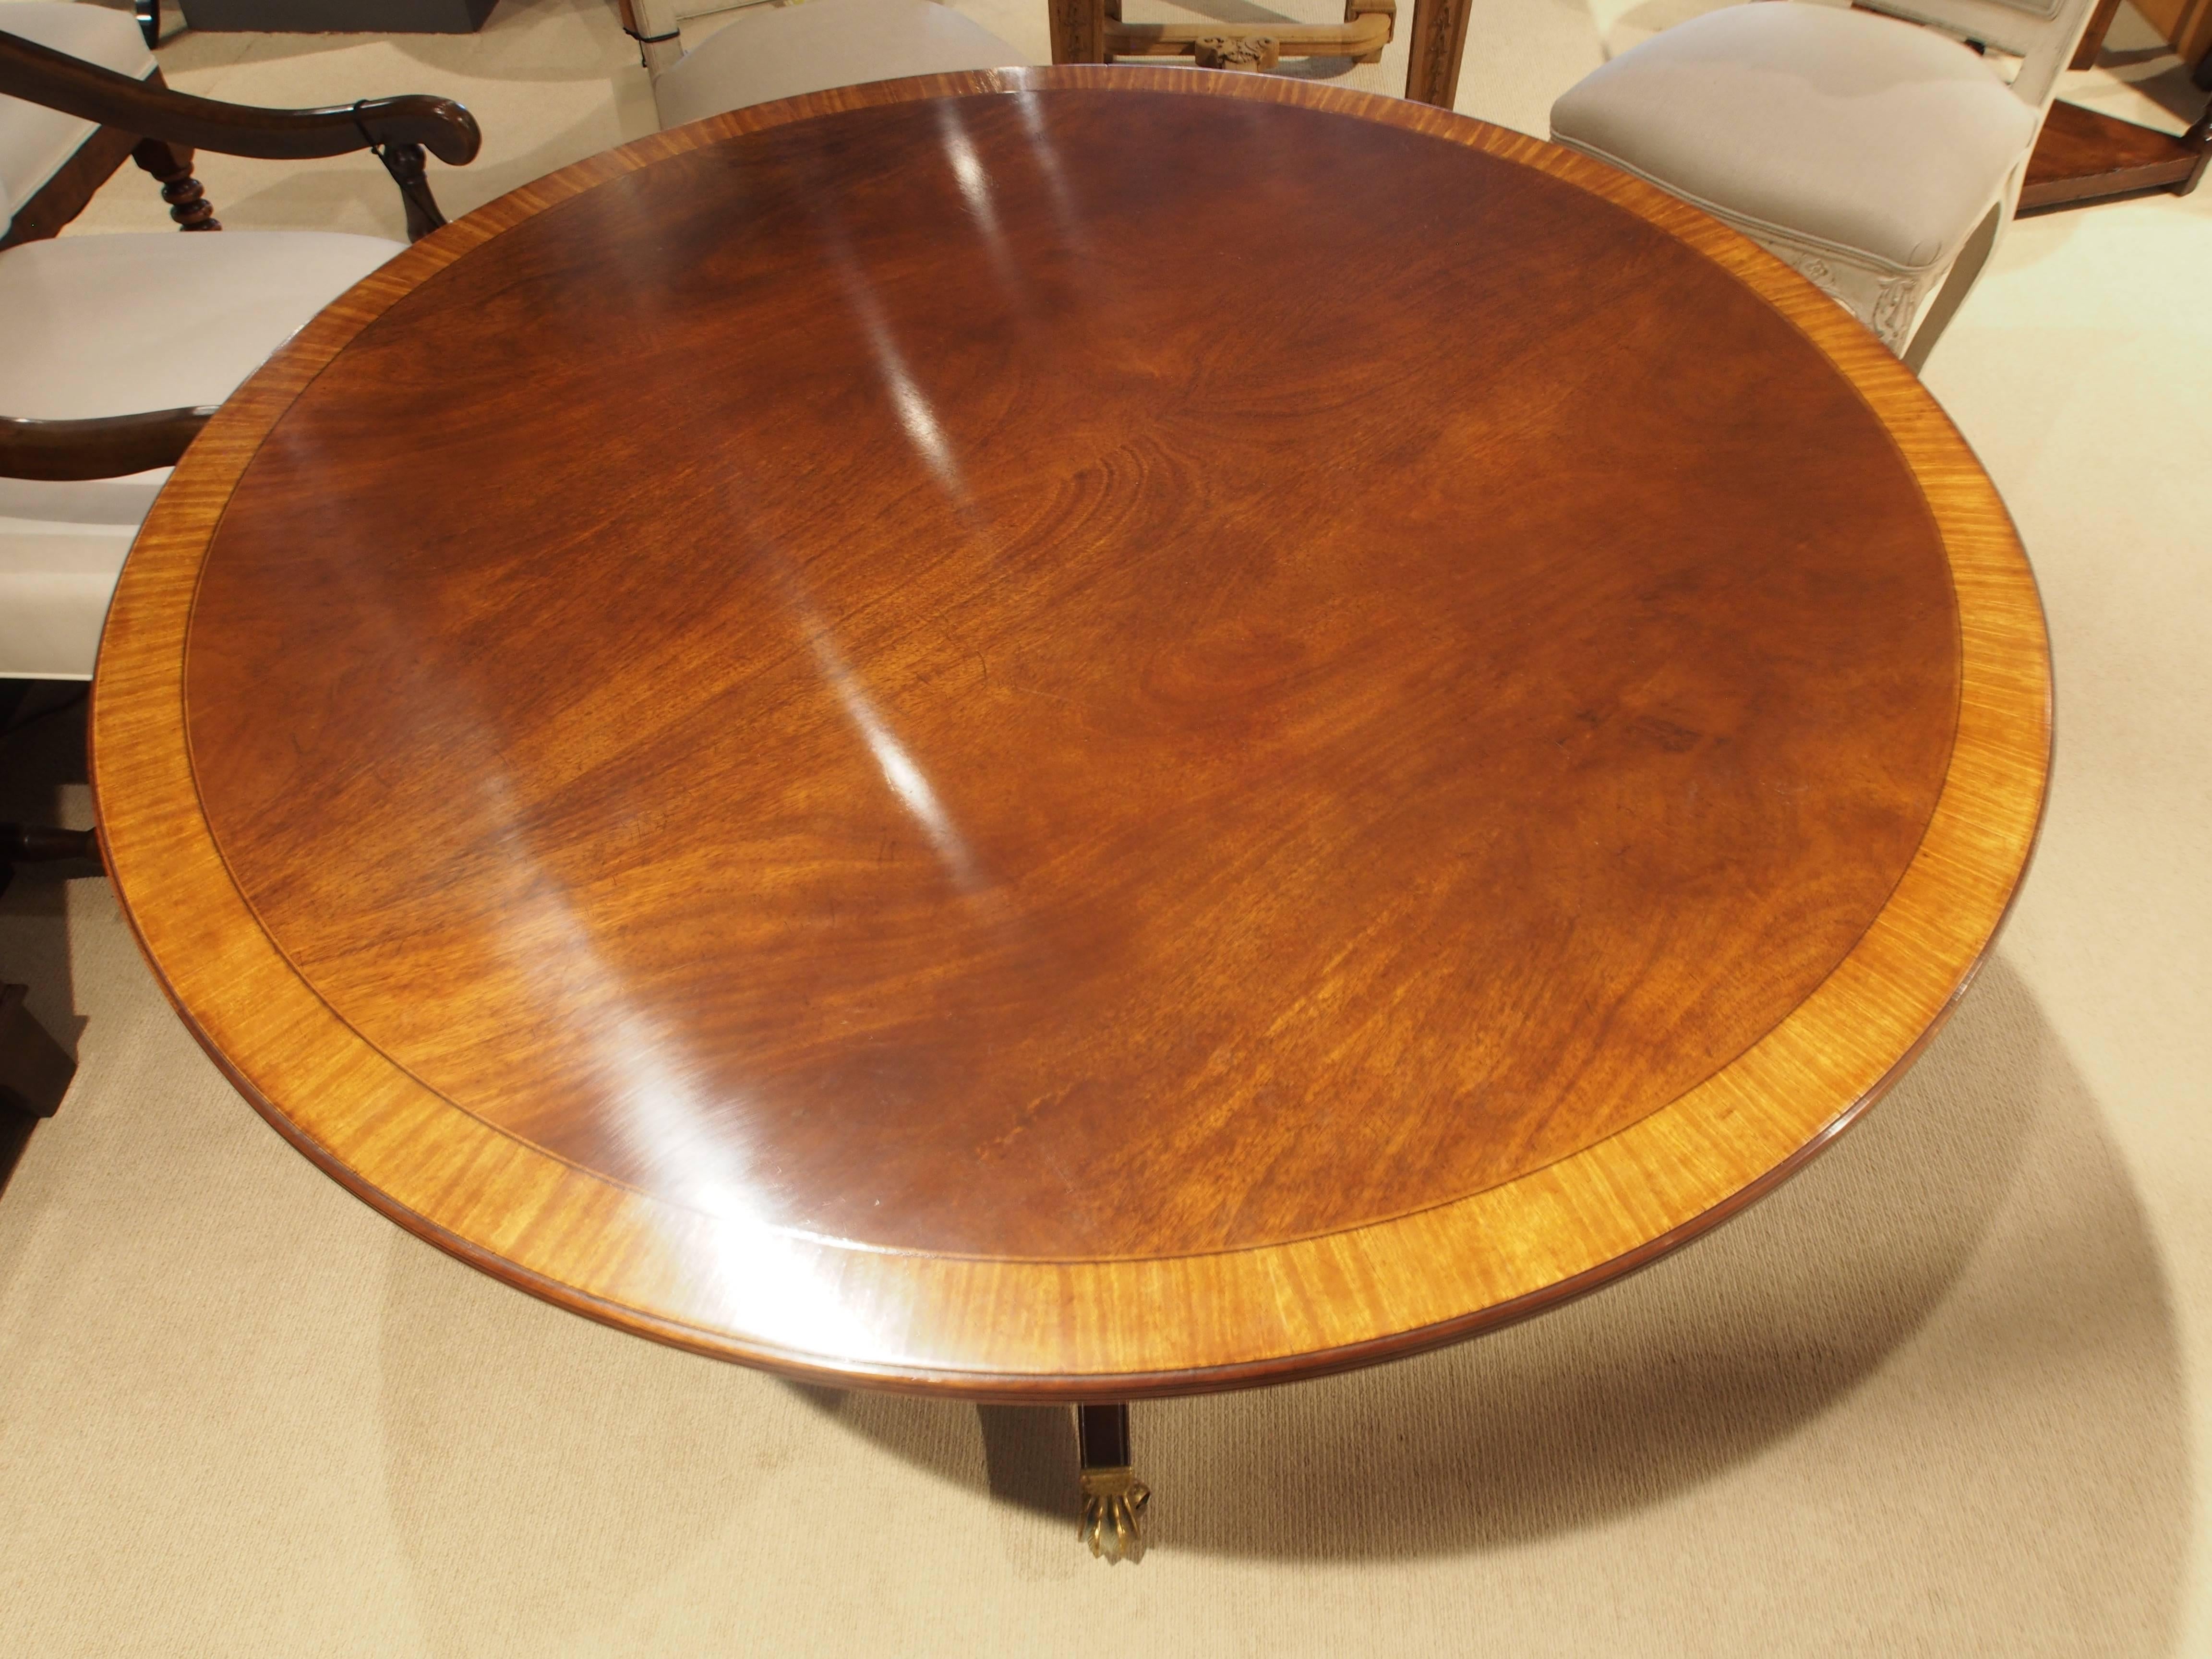 Contemporary Round Pedestal Dining Table in Mahogany, with Satinwood Banding, Georgian Style